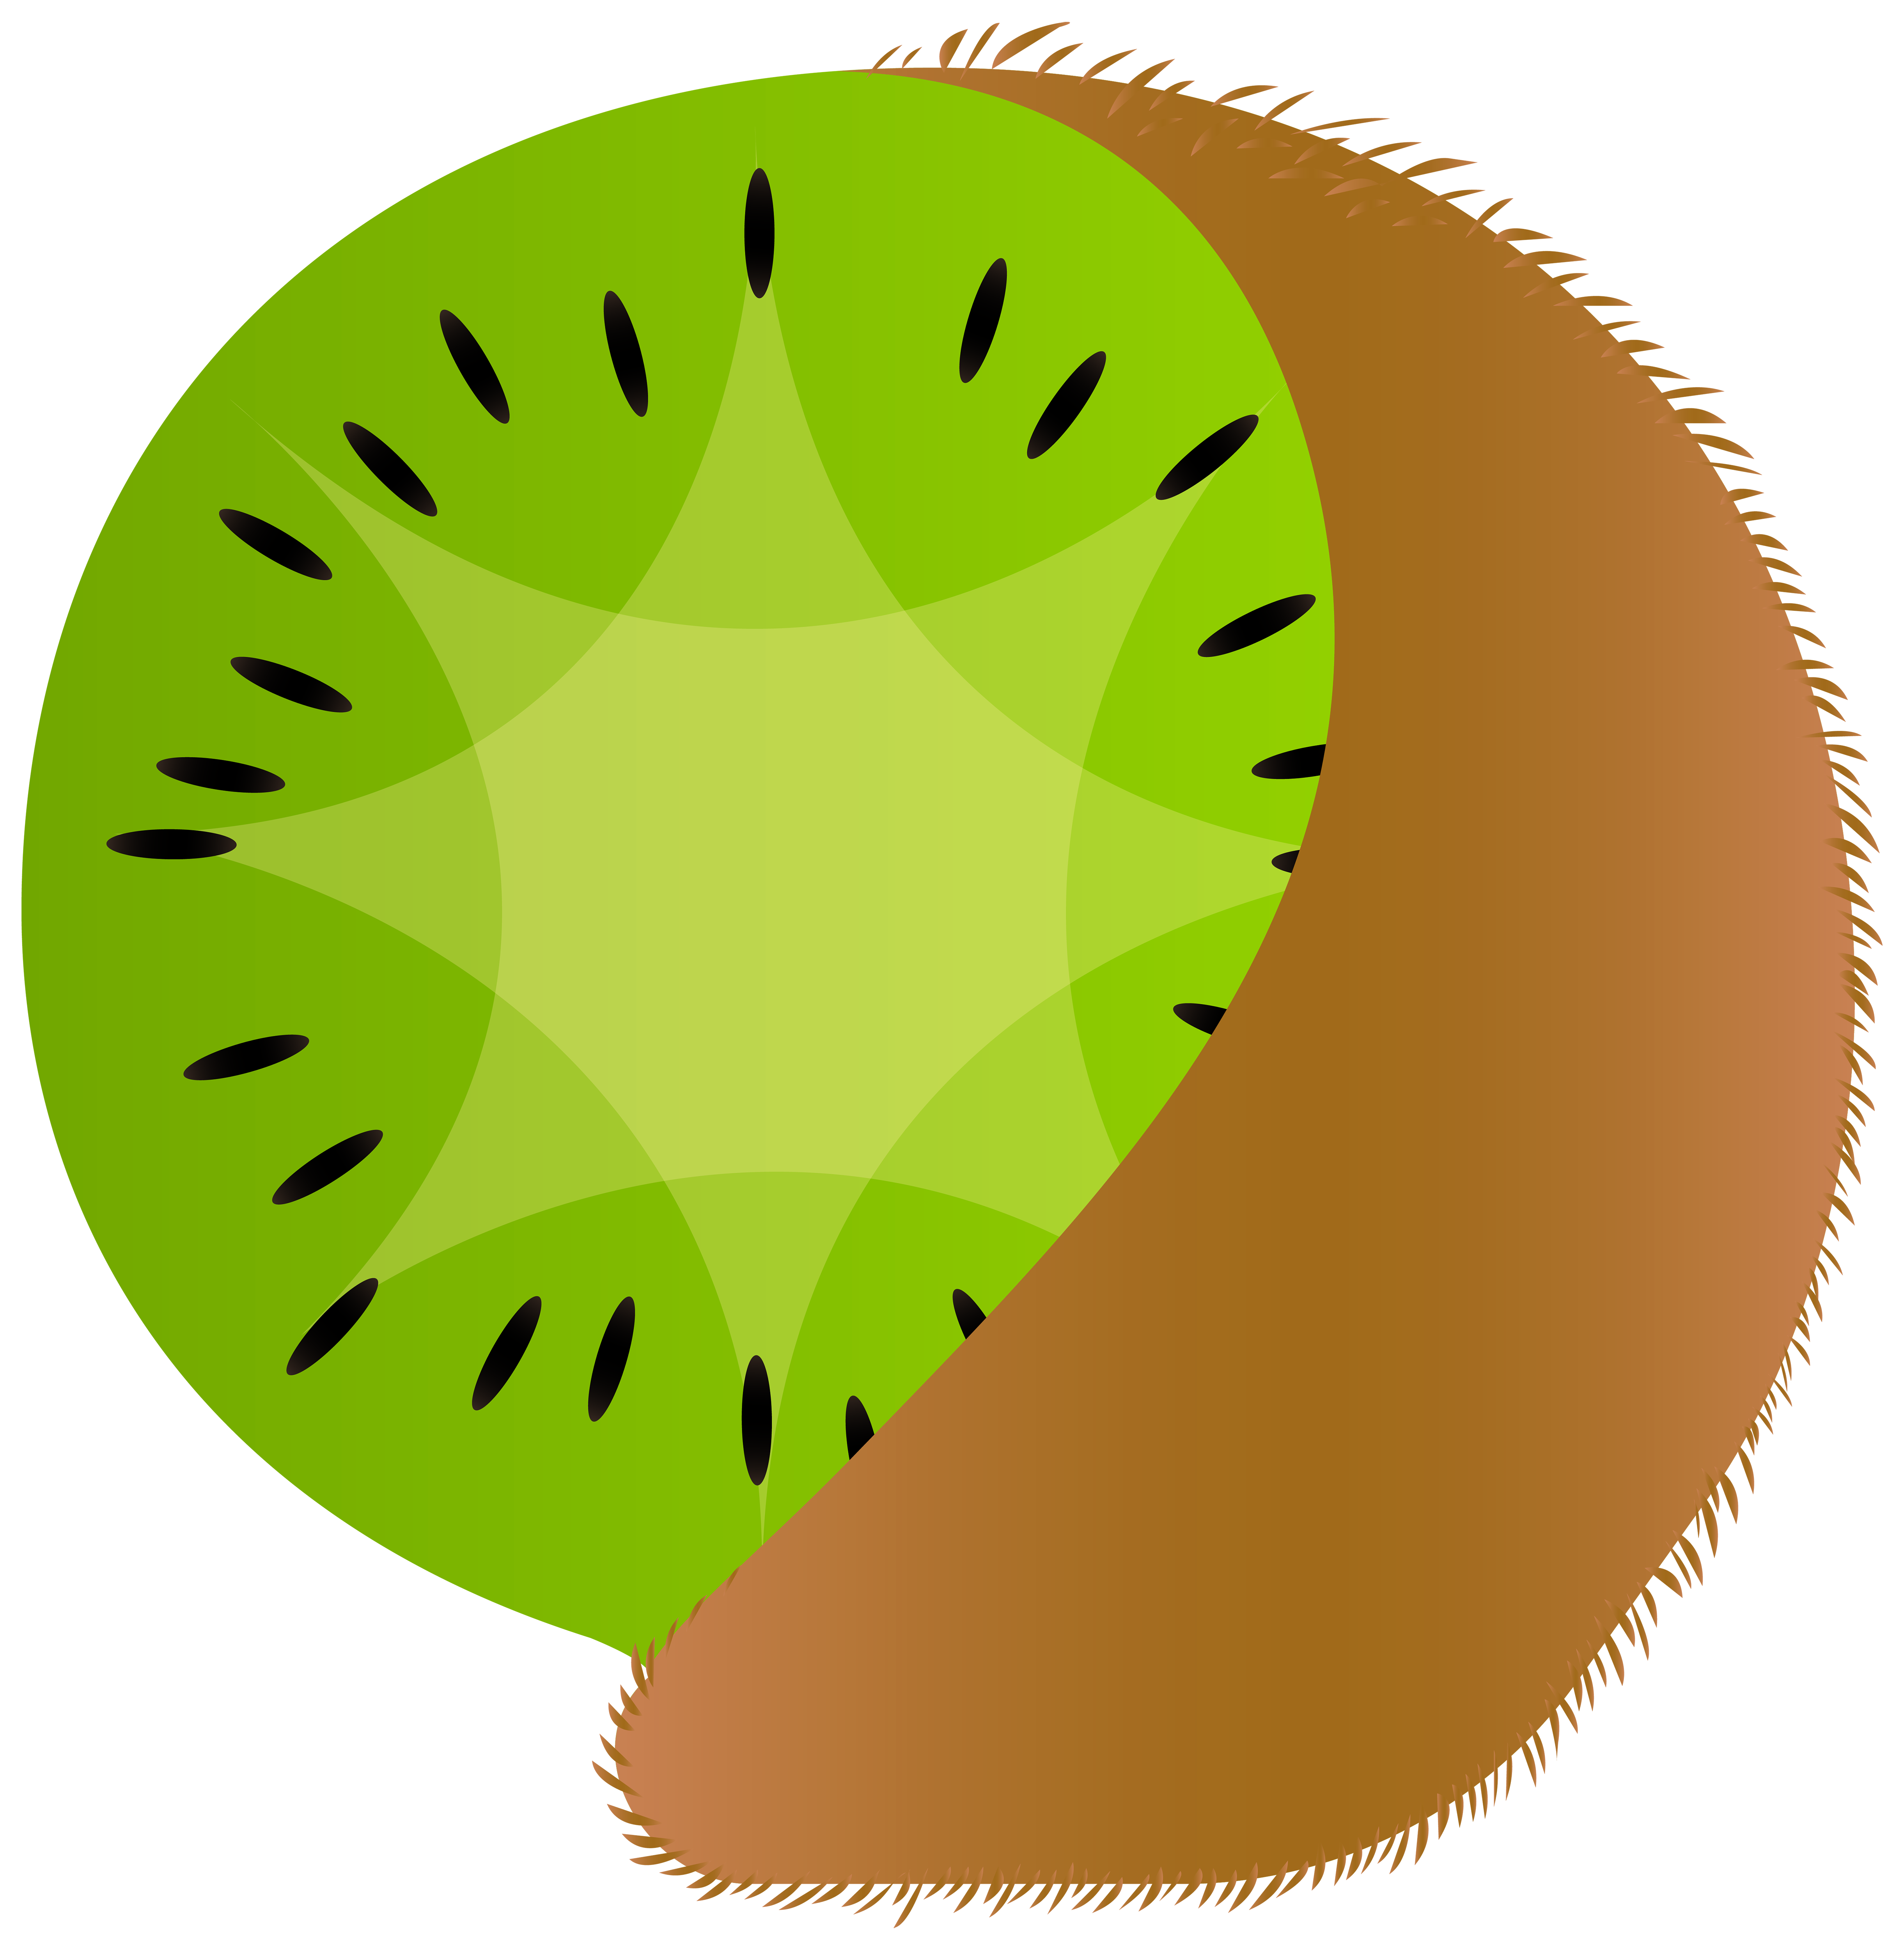 Kiwi fruit at getdrawings. Watermelon clipart whole